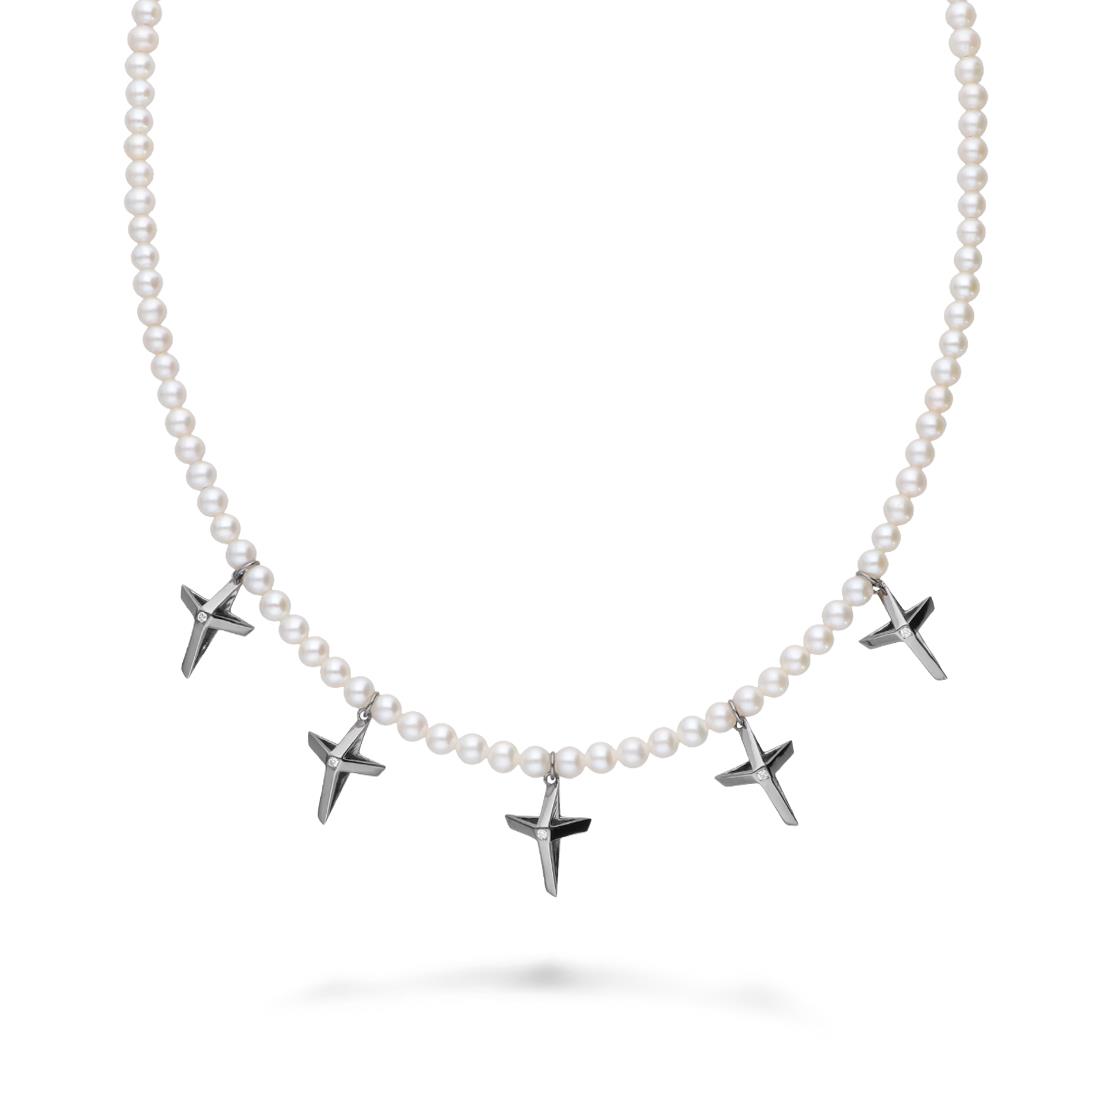 La Cronce necklace in pearls and silver crosses - ALFIERI & ST. JOHN